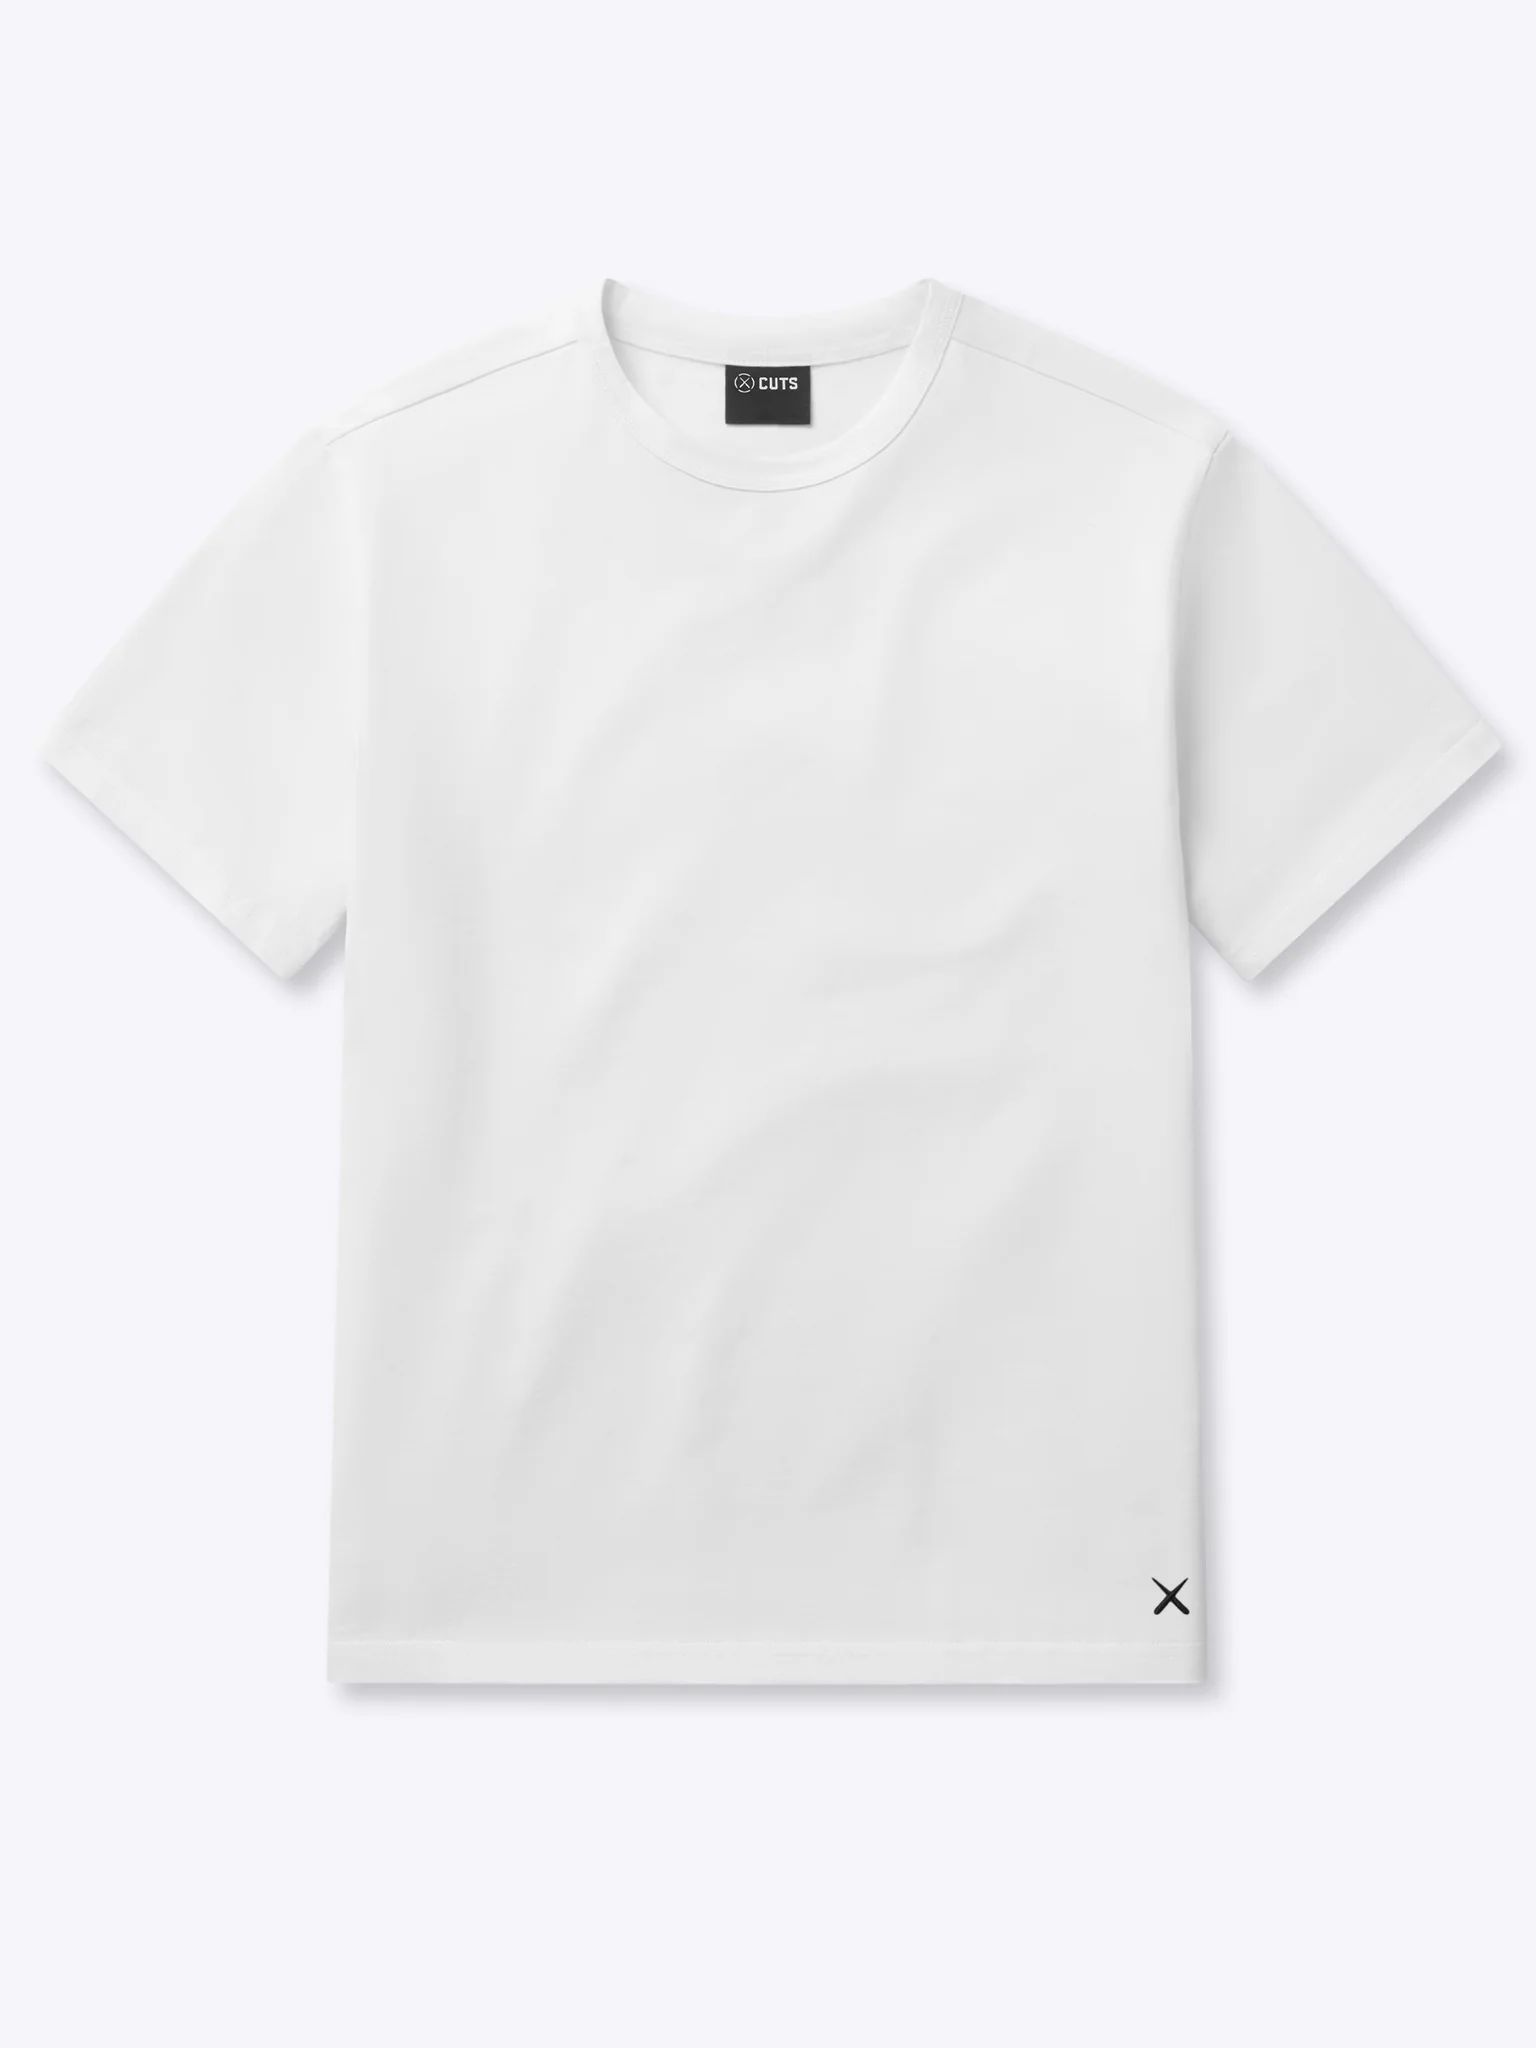 Overtime Oversized Tee | Cuts Clothing Inc.